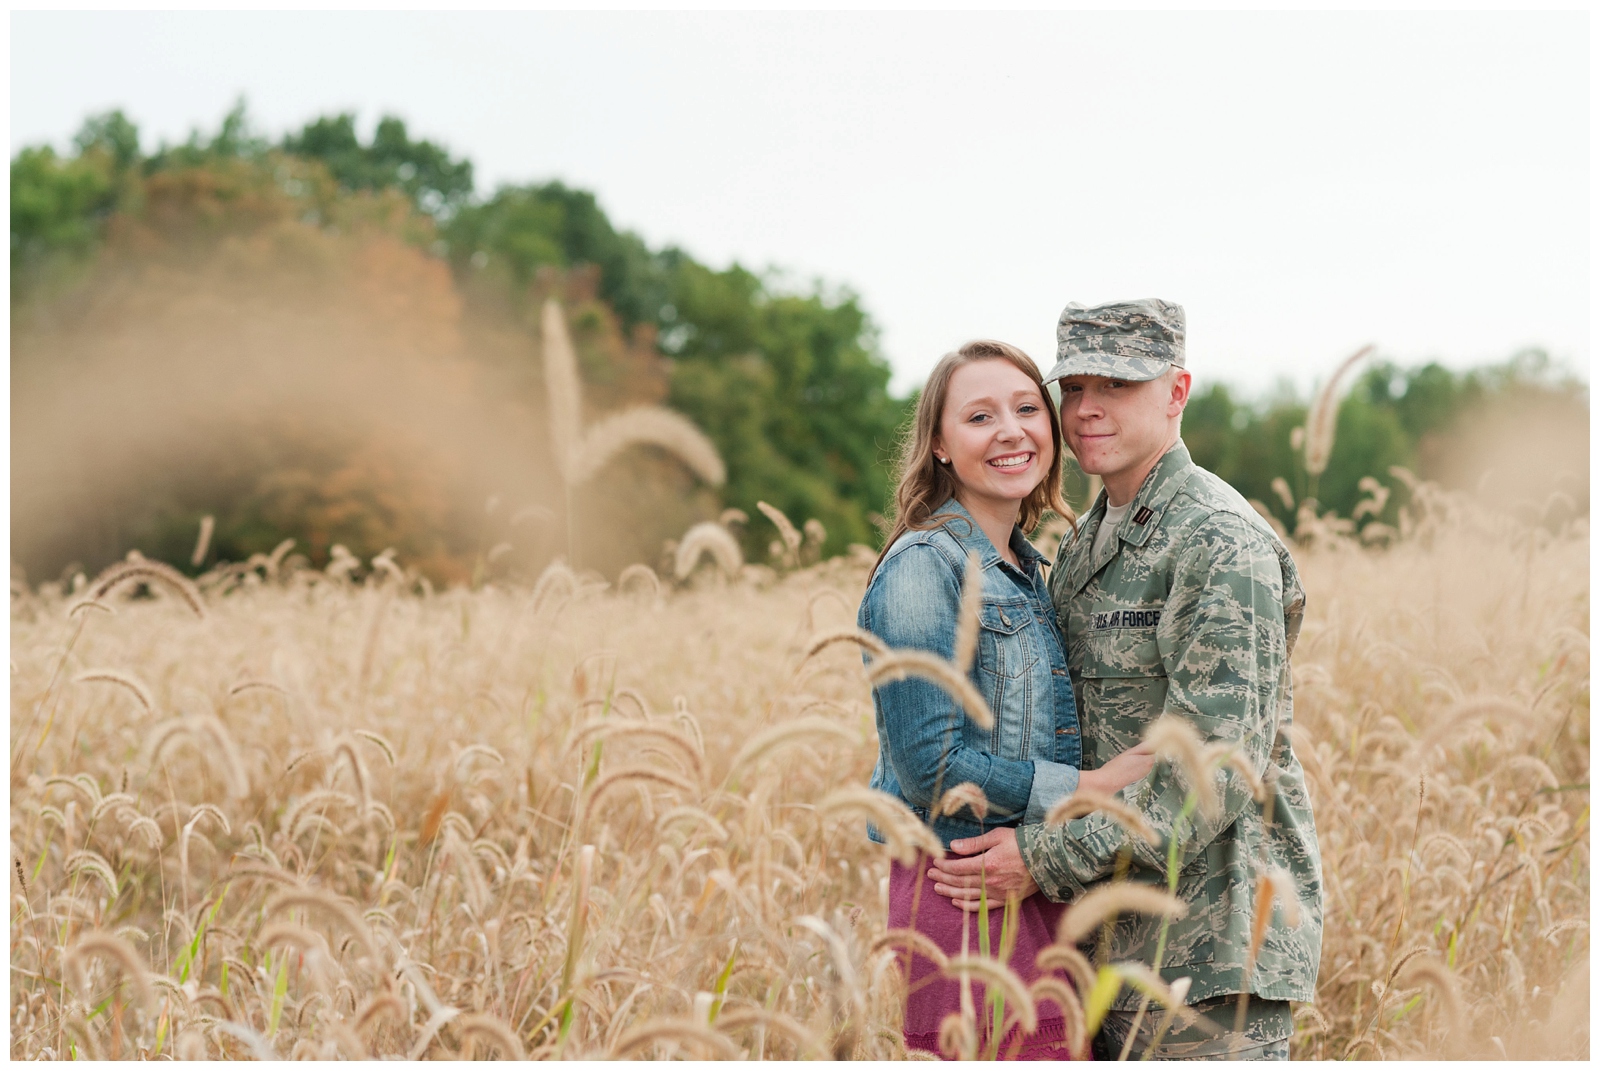 Engaged couple looking at camera in wheat field with burgundy dress and military bdus on in Country Engagement Session Sunbury Ohio